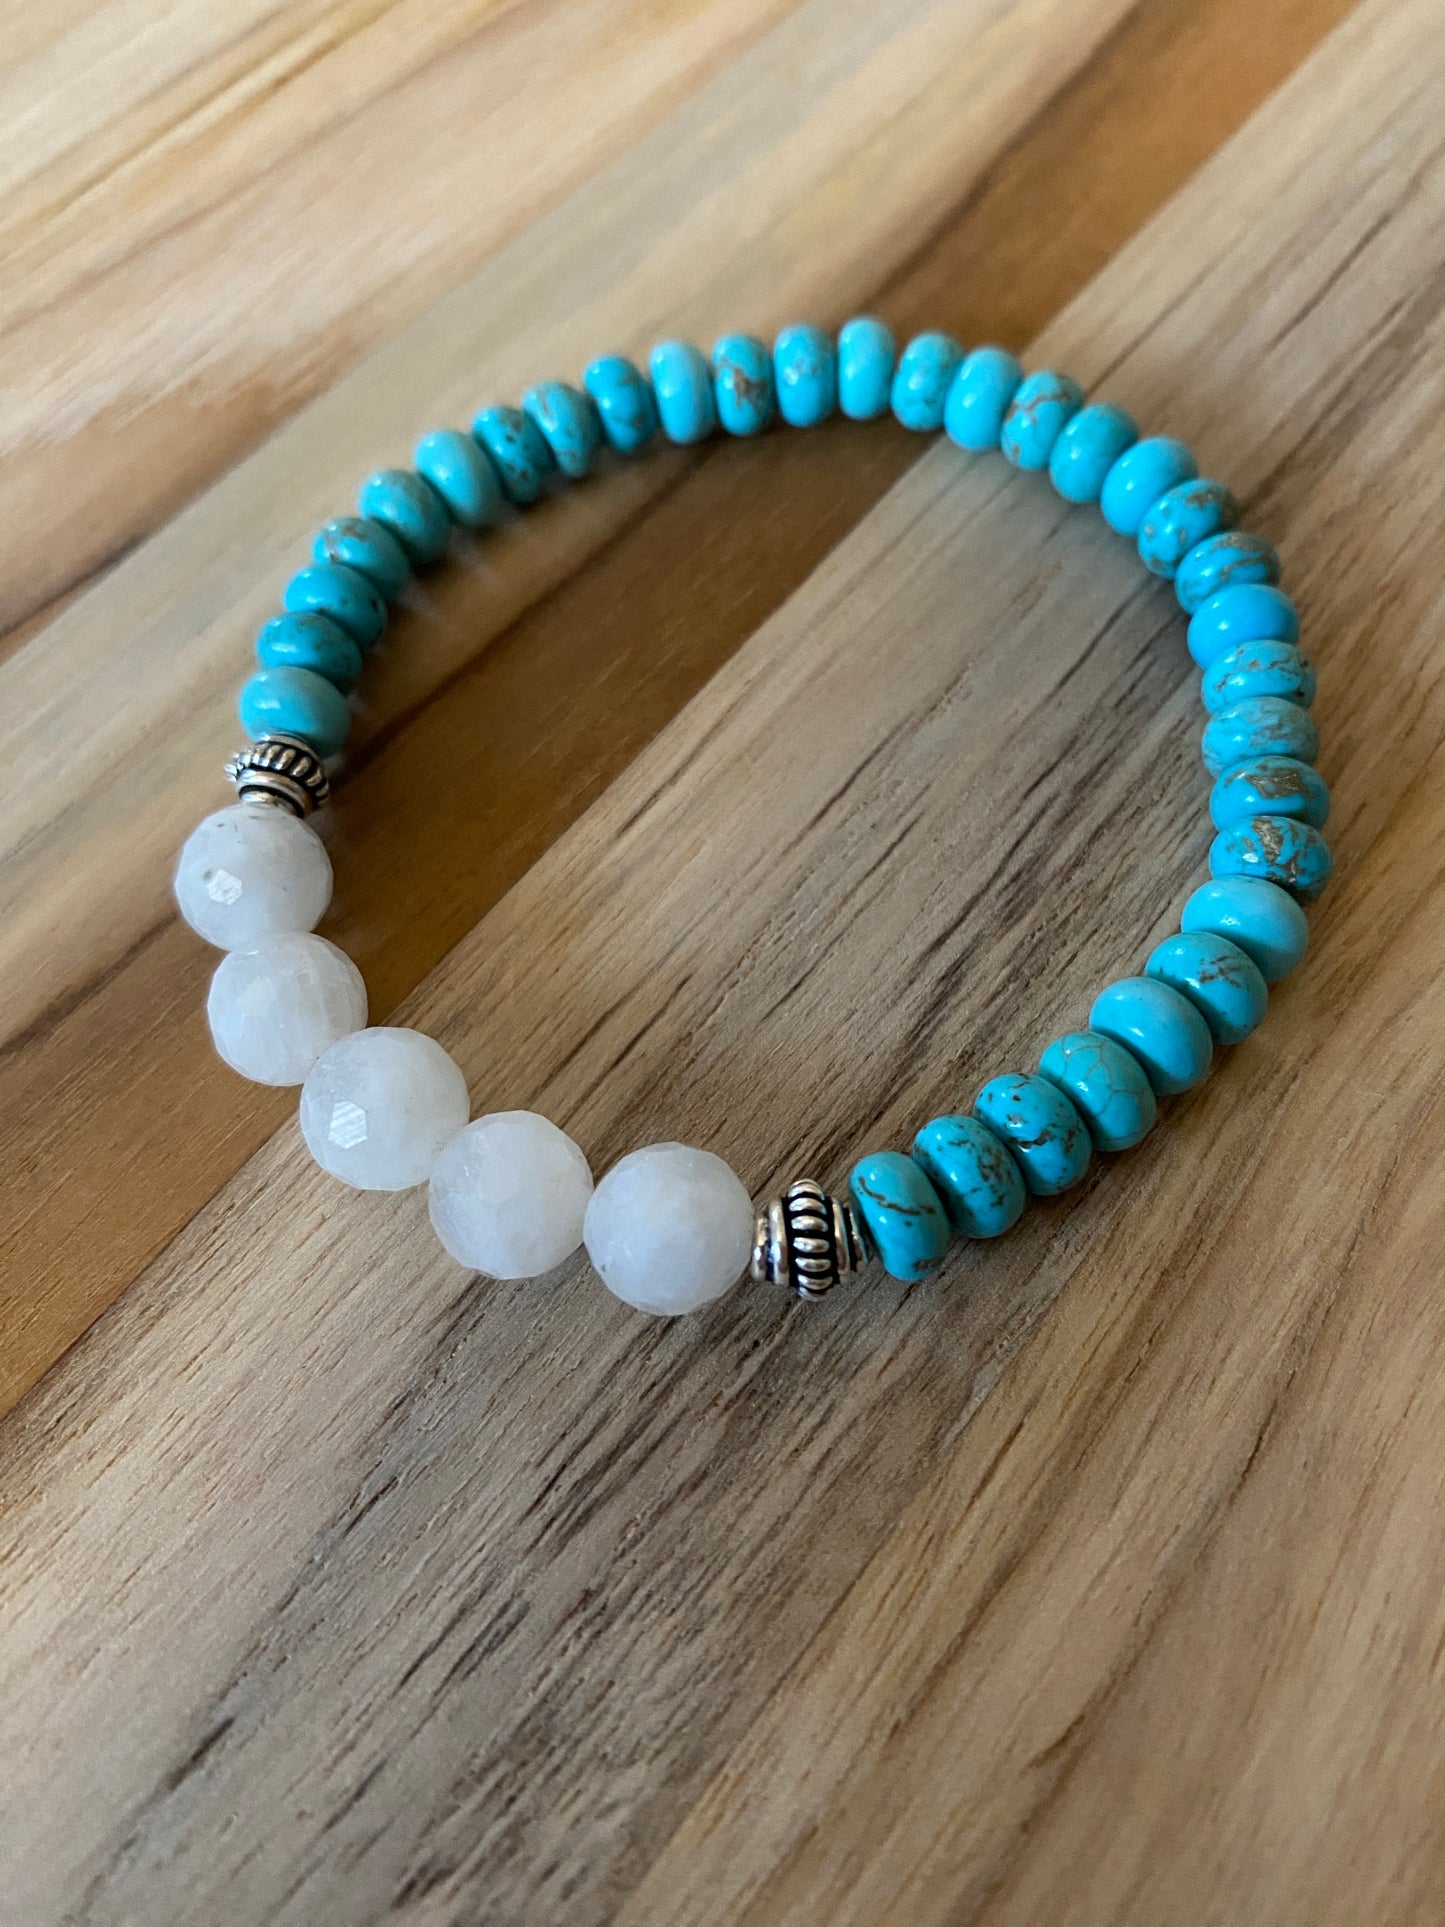 Nevada Blue Turquoise Beaded Stretch Bracelet with Faceted Moonstone Beads